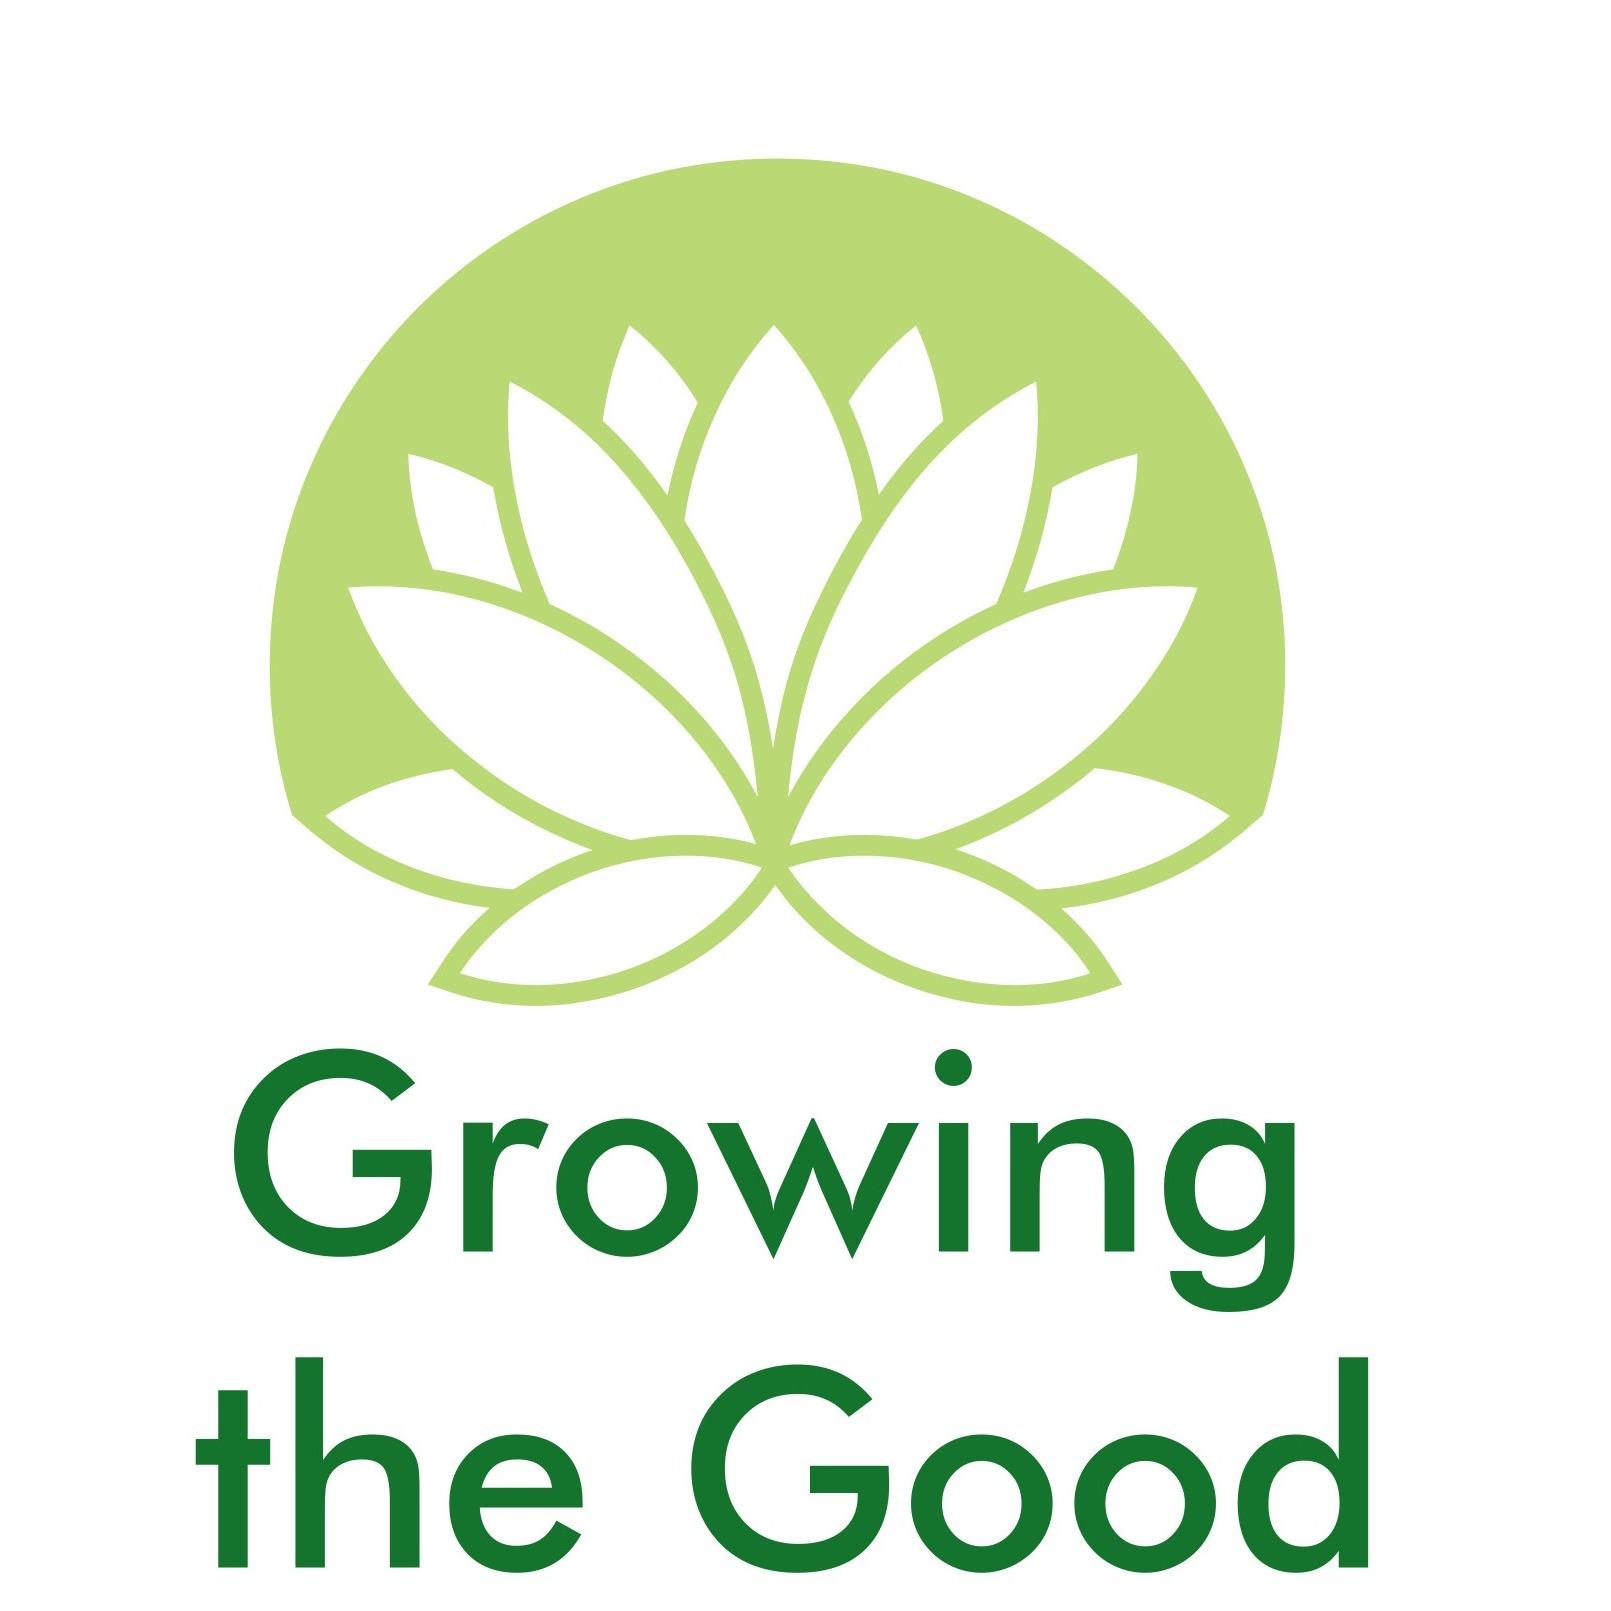 Growing the Good - The Mindful Podcast